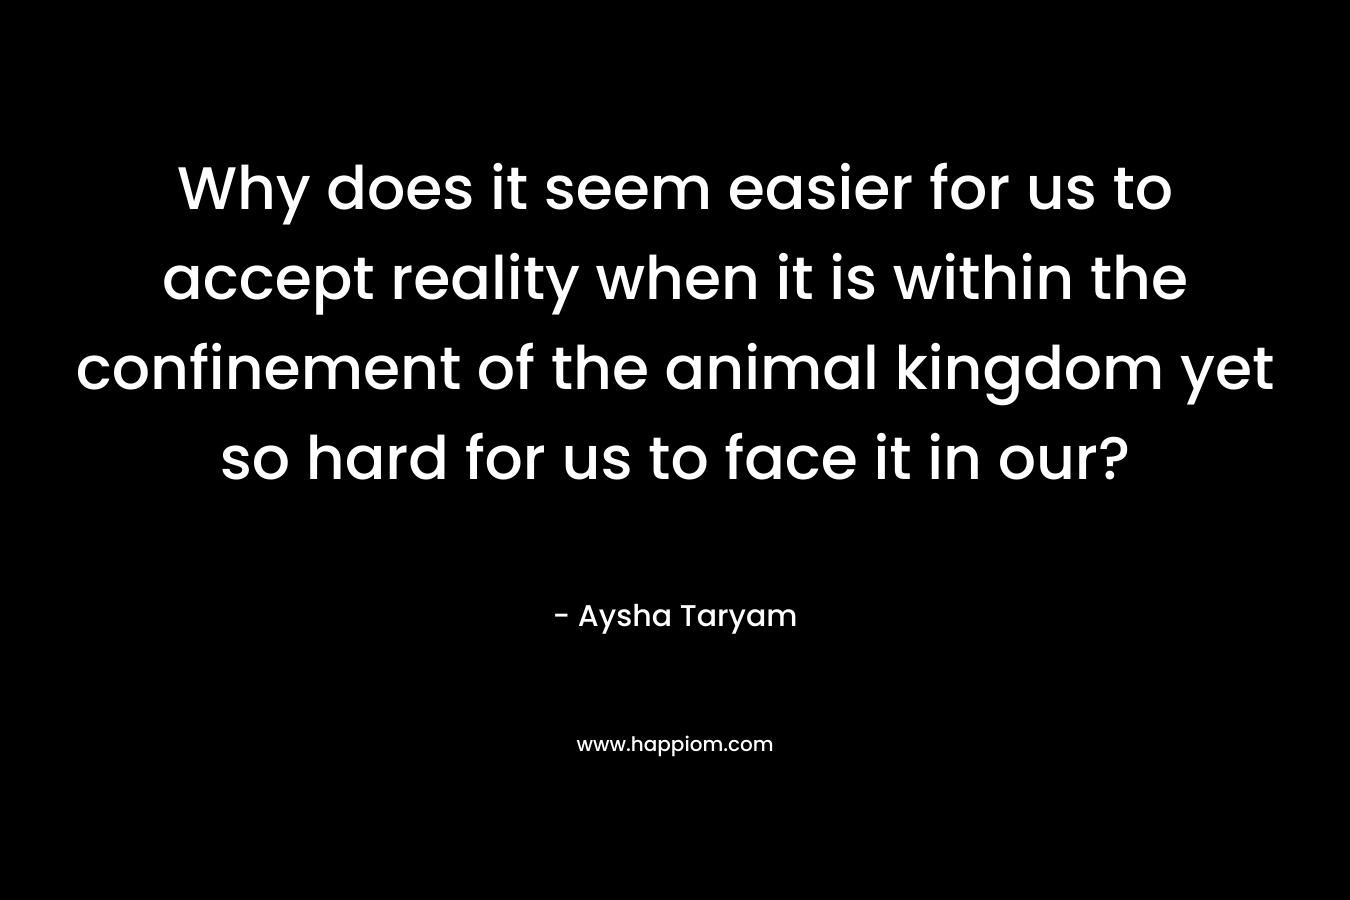 Why does it seem easier for us to accept reality when it is within the confinement of the animal kingdom yet so hard for us to face it in our?